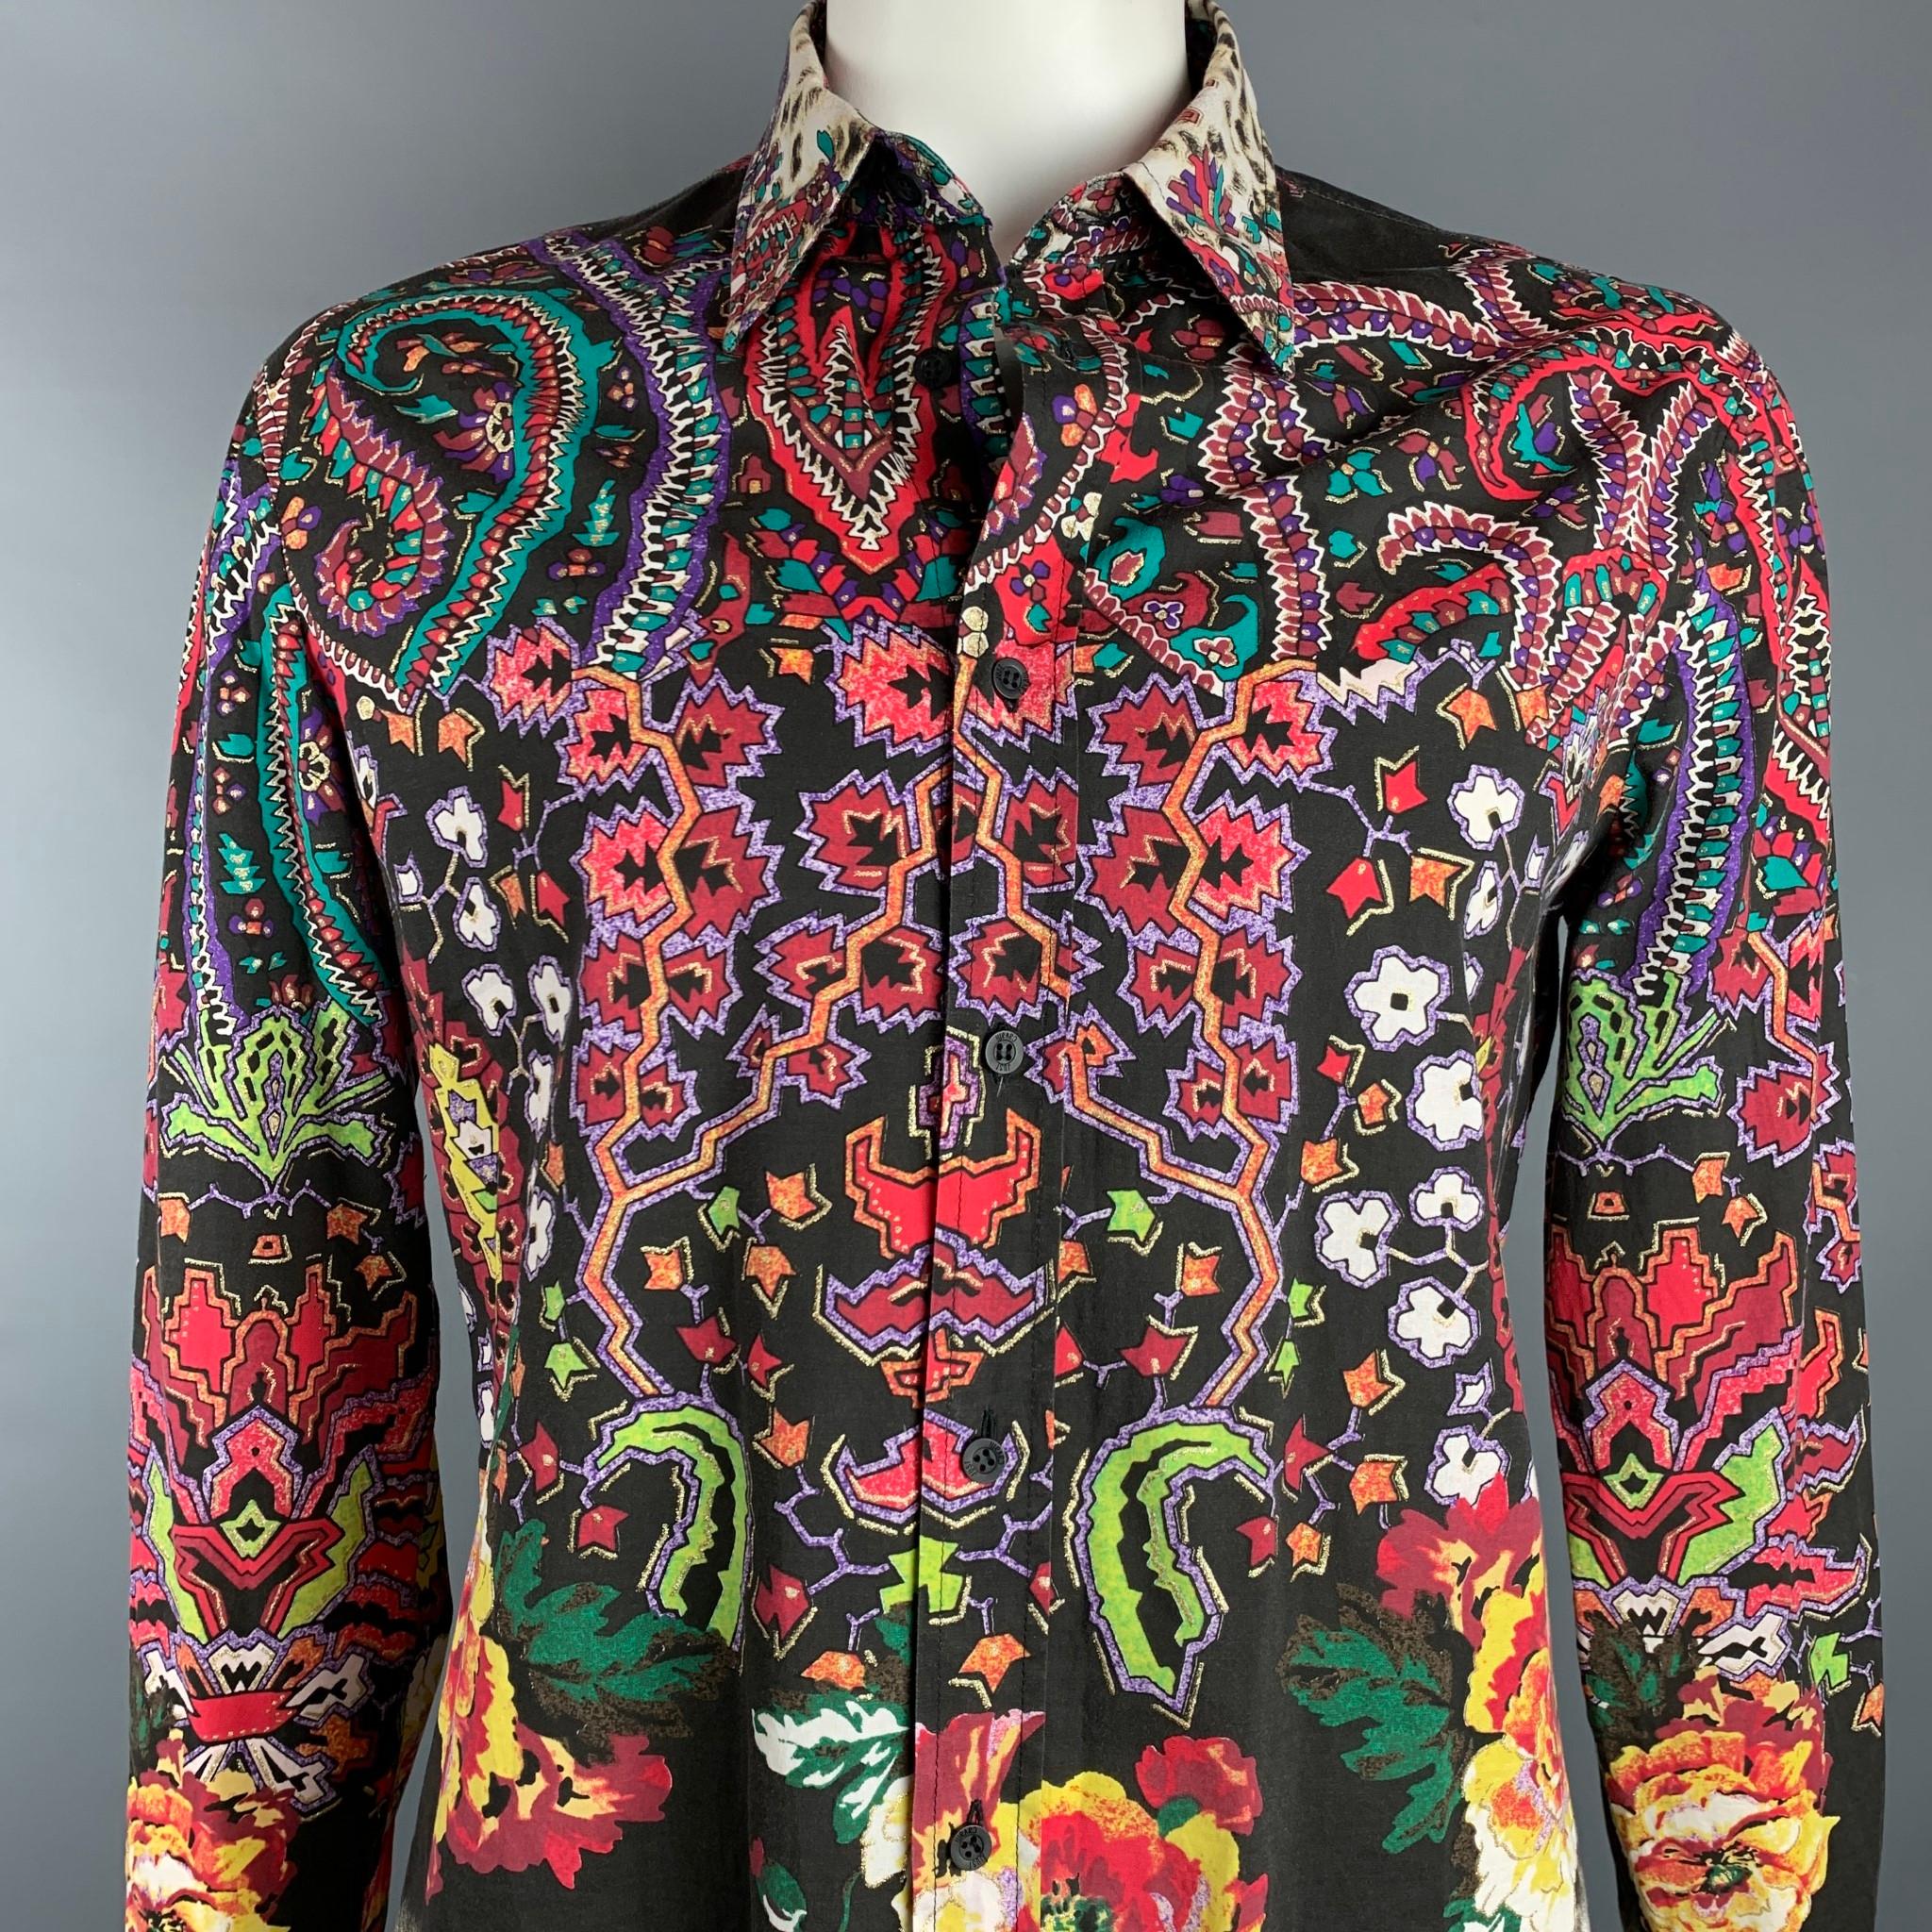 JUST CAVALLI long sleeve shirt comes in a multi-color print cotton blend featuring a button up style and a spread collar. Made in Italy.

Very Good Pre-Owned Condition.
Marked: XXL

Measurements:

Shoulder: 19.5 in.
Chest: 46 in.
Sleeve: 27